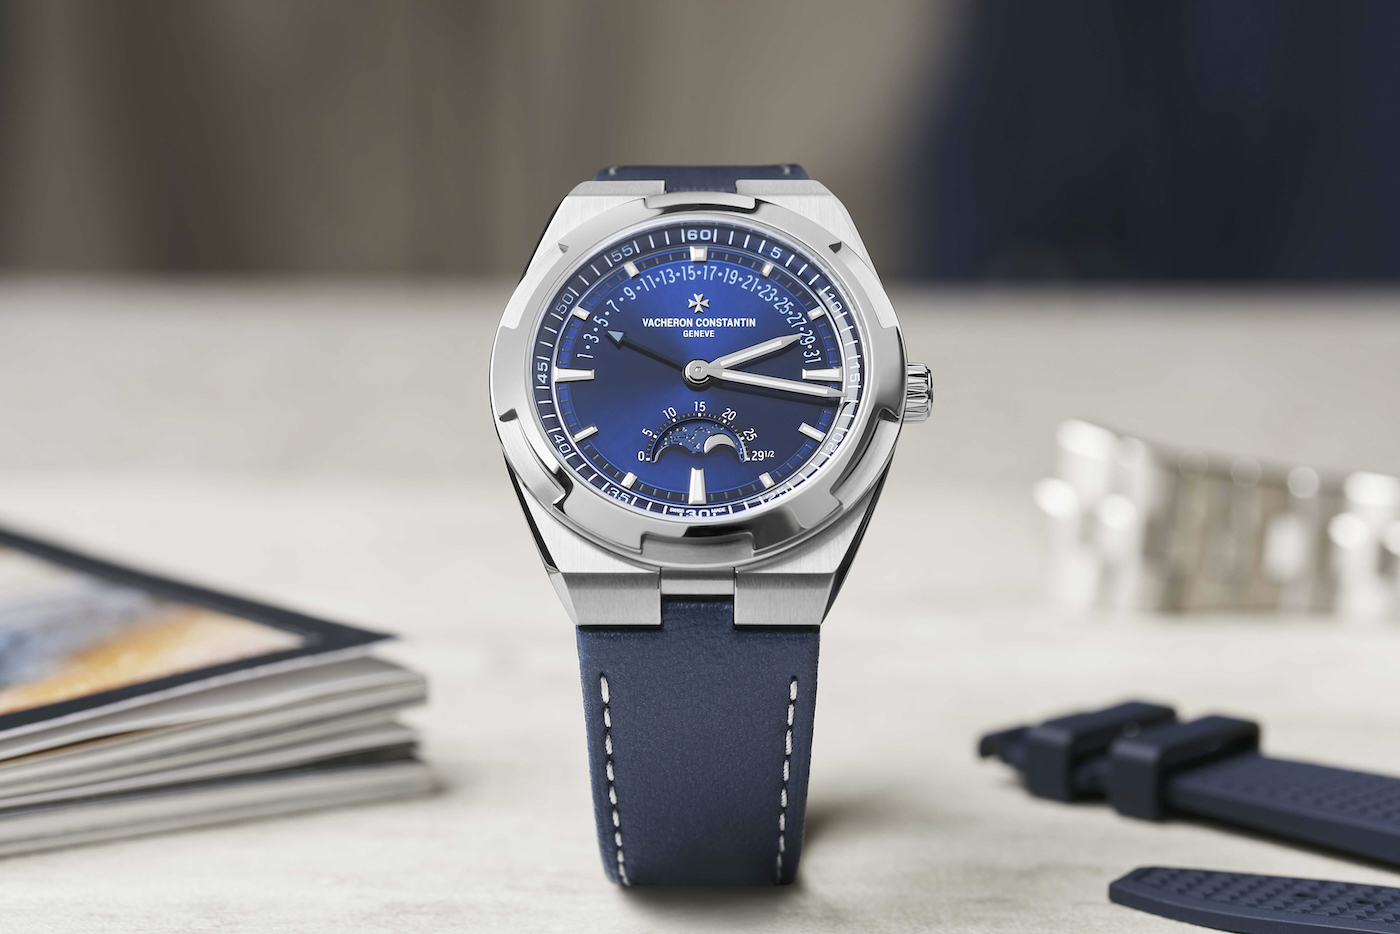 Vacheron Constantin Launches A New Overseas Watch With Moonphase